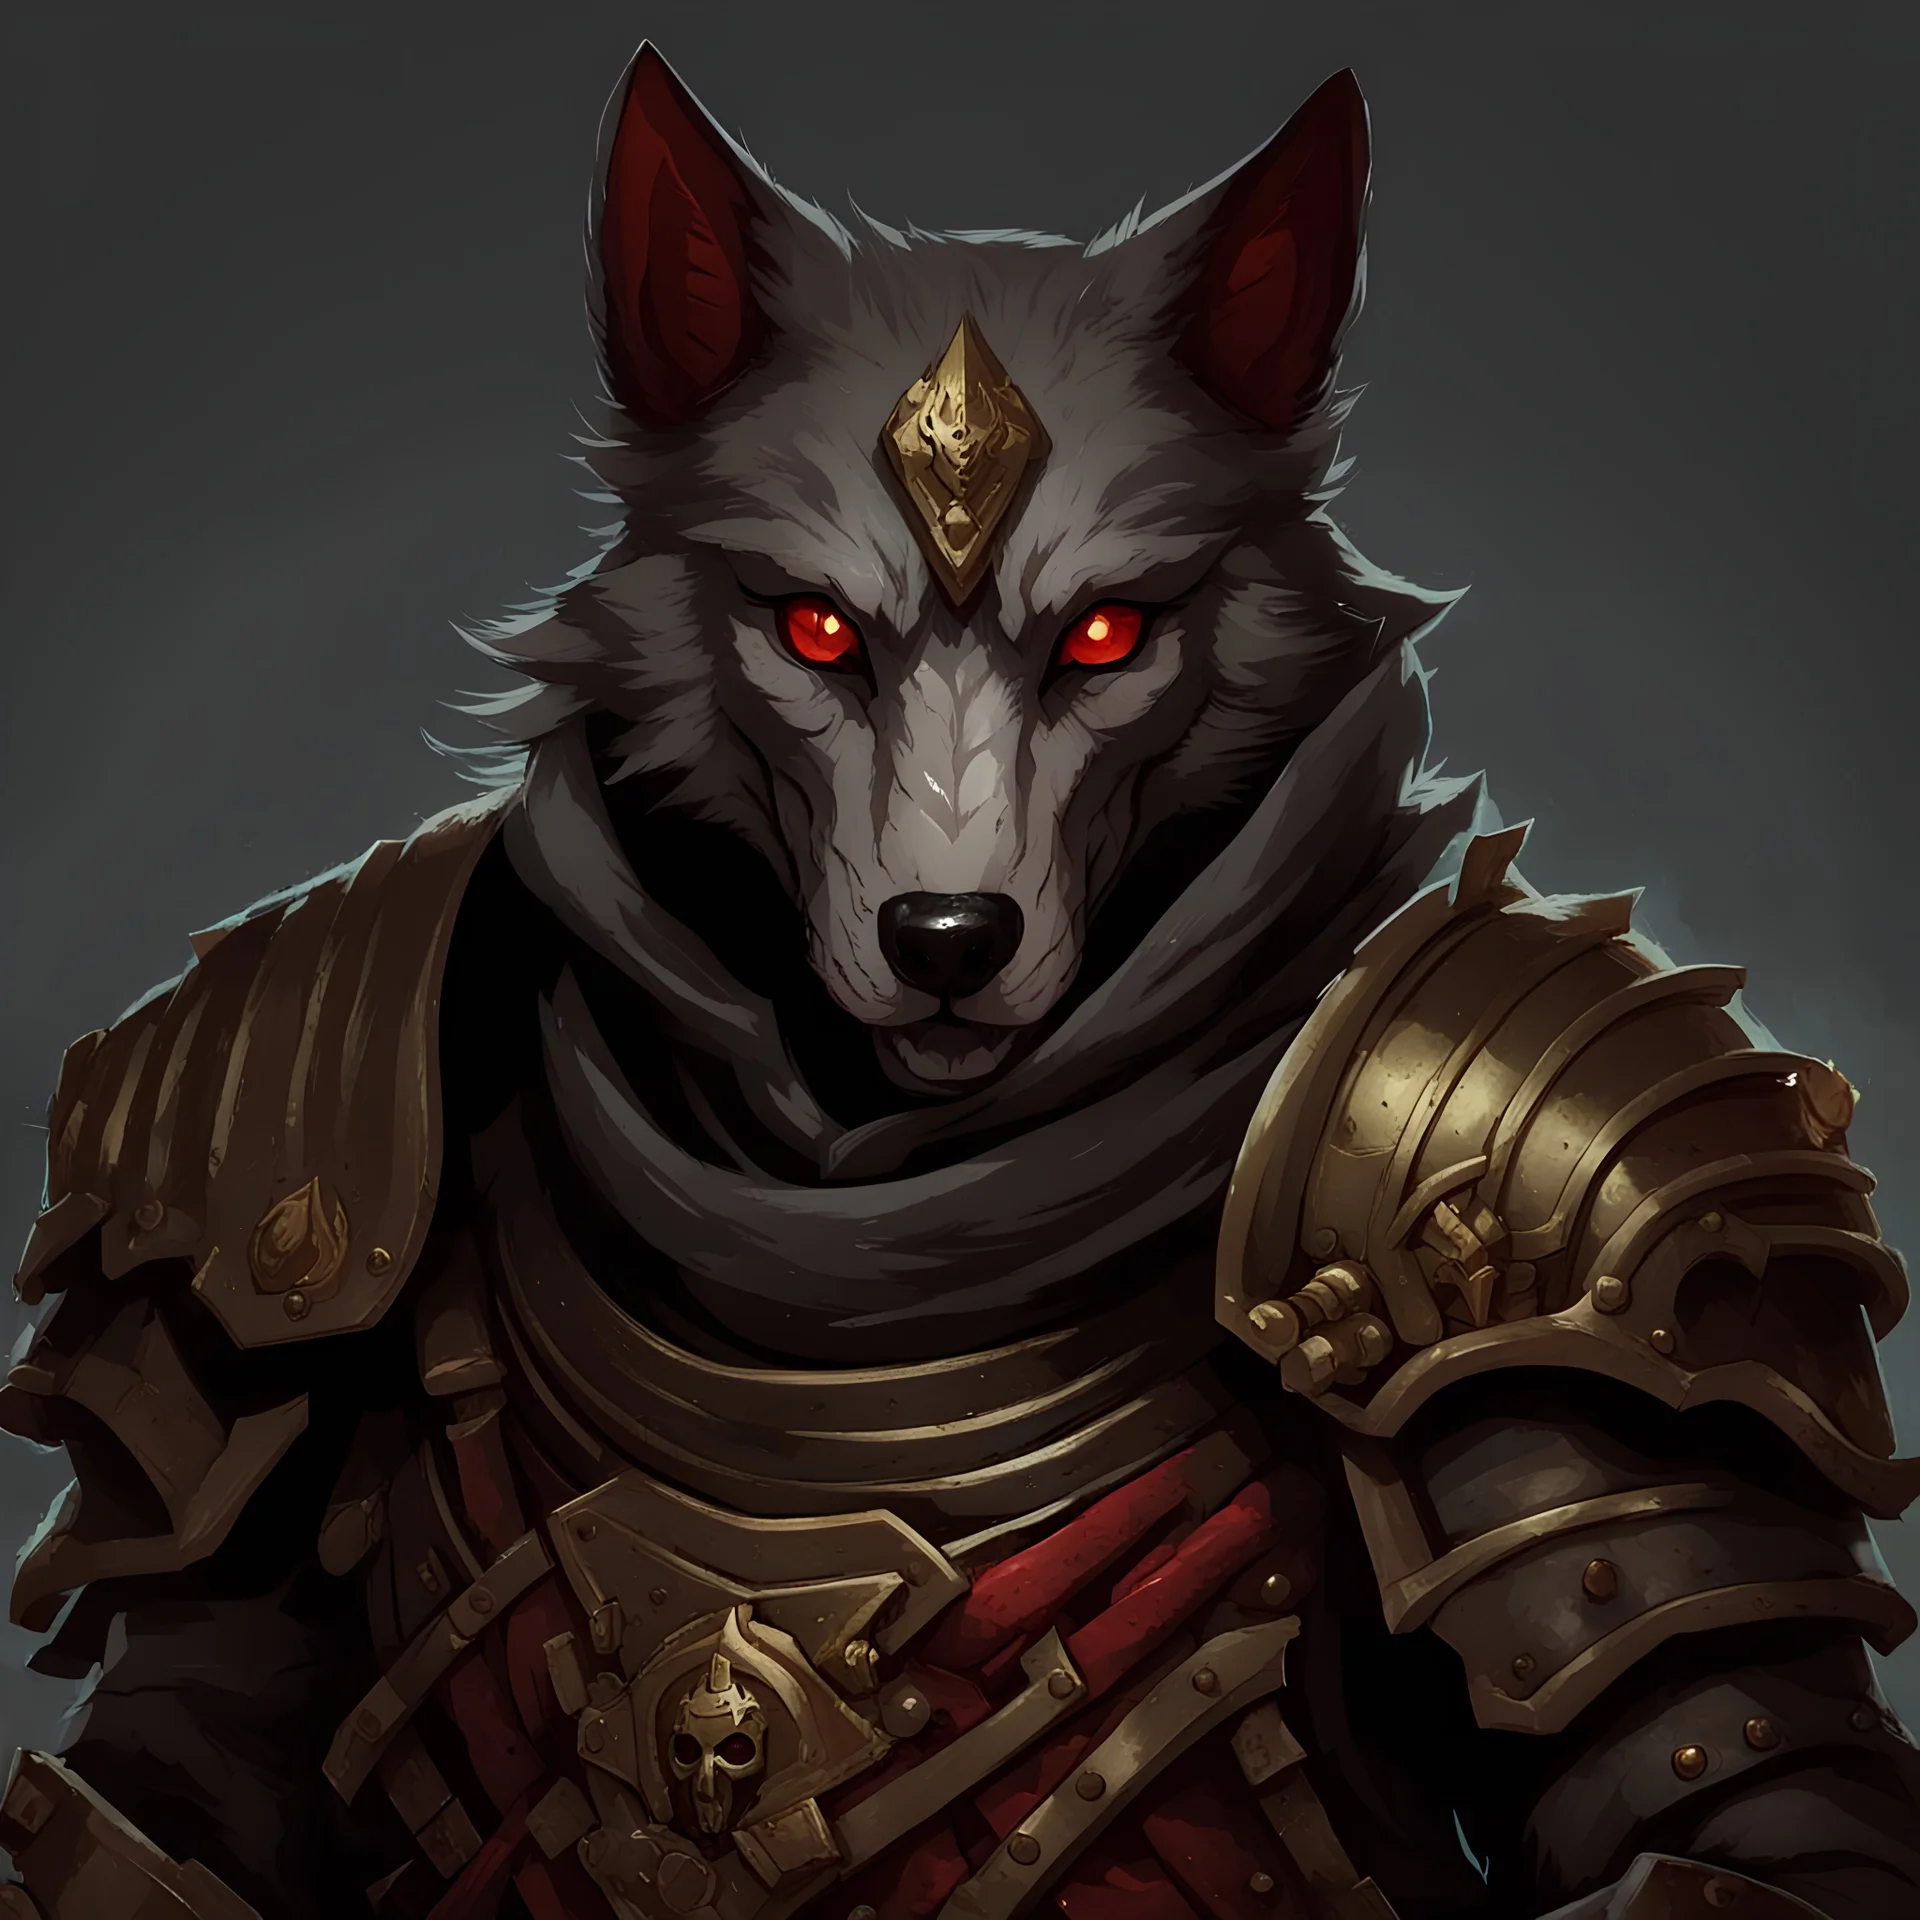 a wolf-like tabaxi in necromancer armour with heterochromia gold and red eyes baldurs gate style with skeleton army